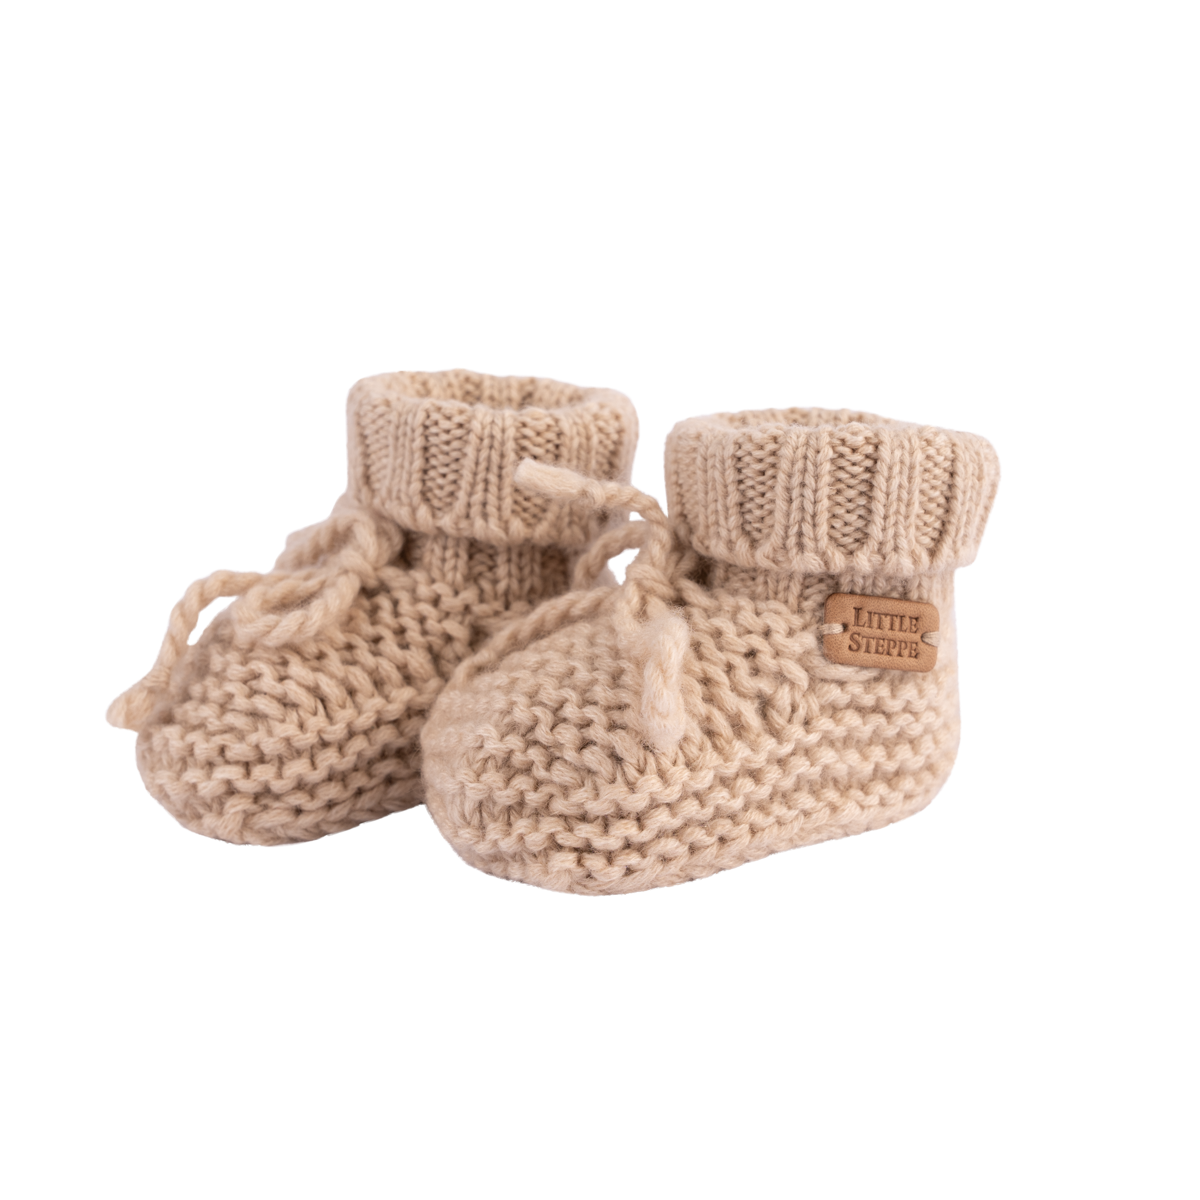 Handknitted Cashmere Baby Booties (0-12 months)